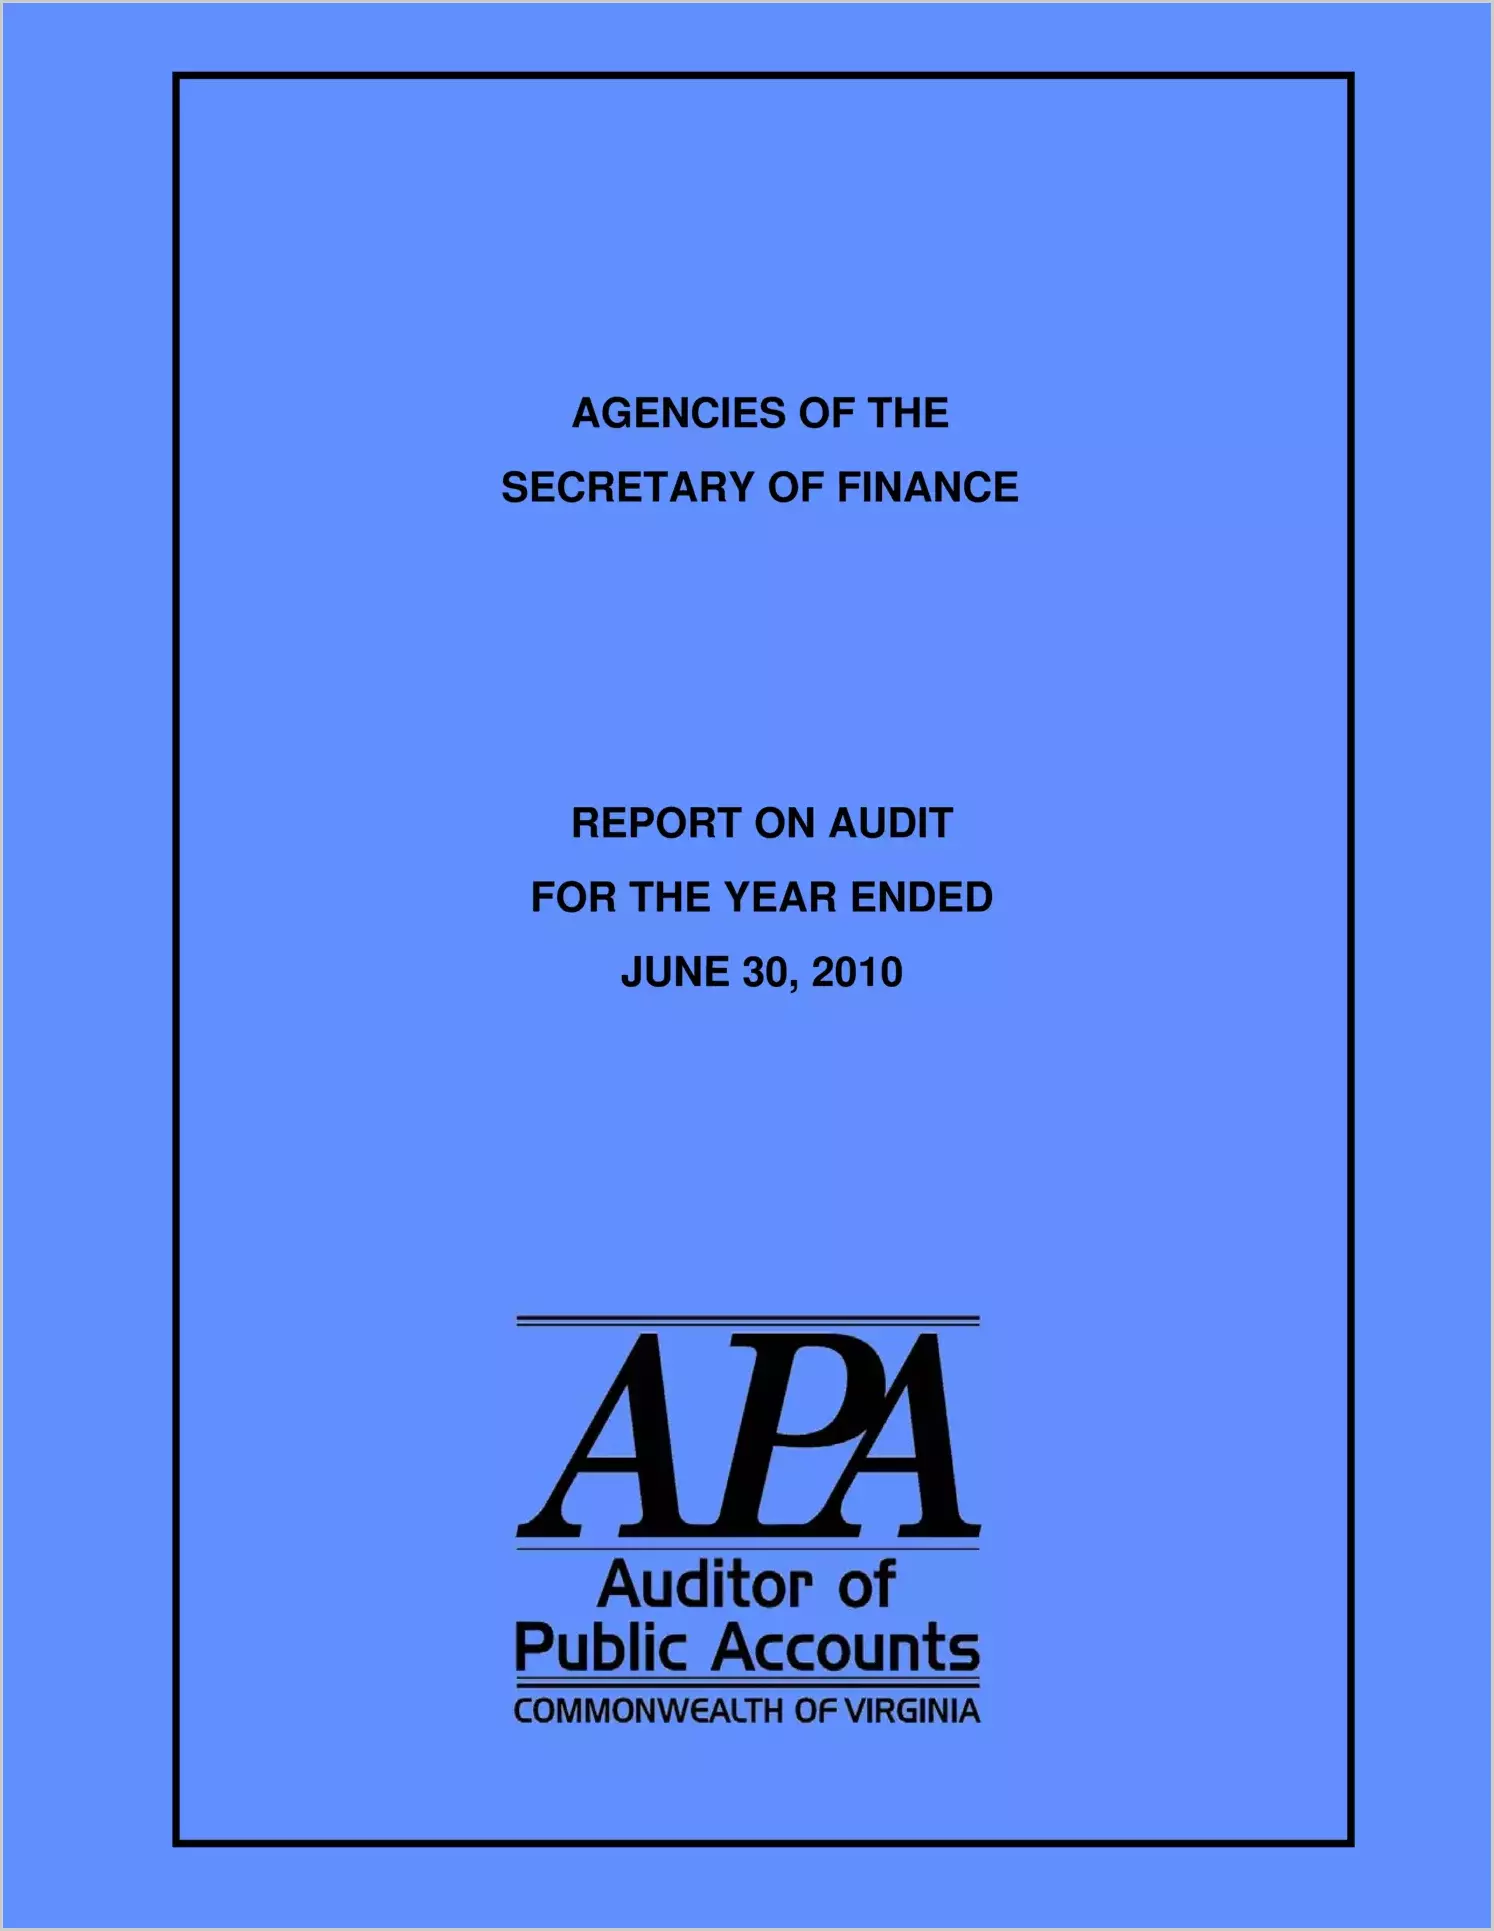 Agencies of the Secretary of Finance report on audit for the year ended June 30, 2010